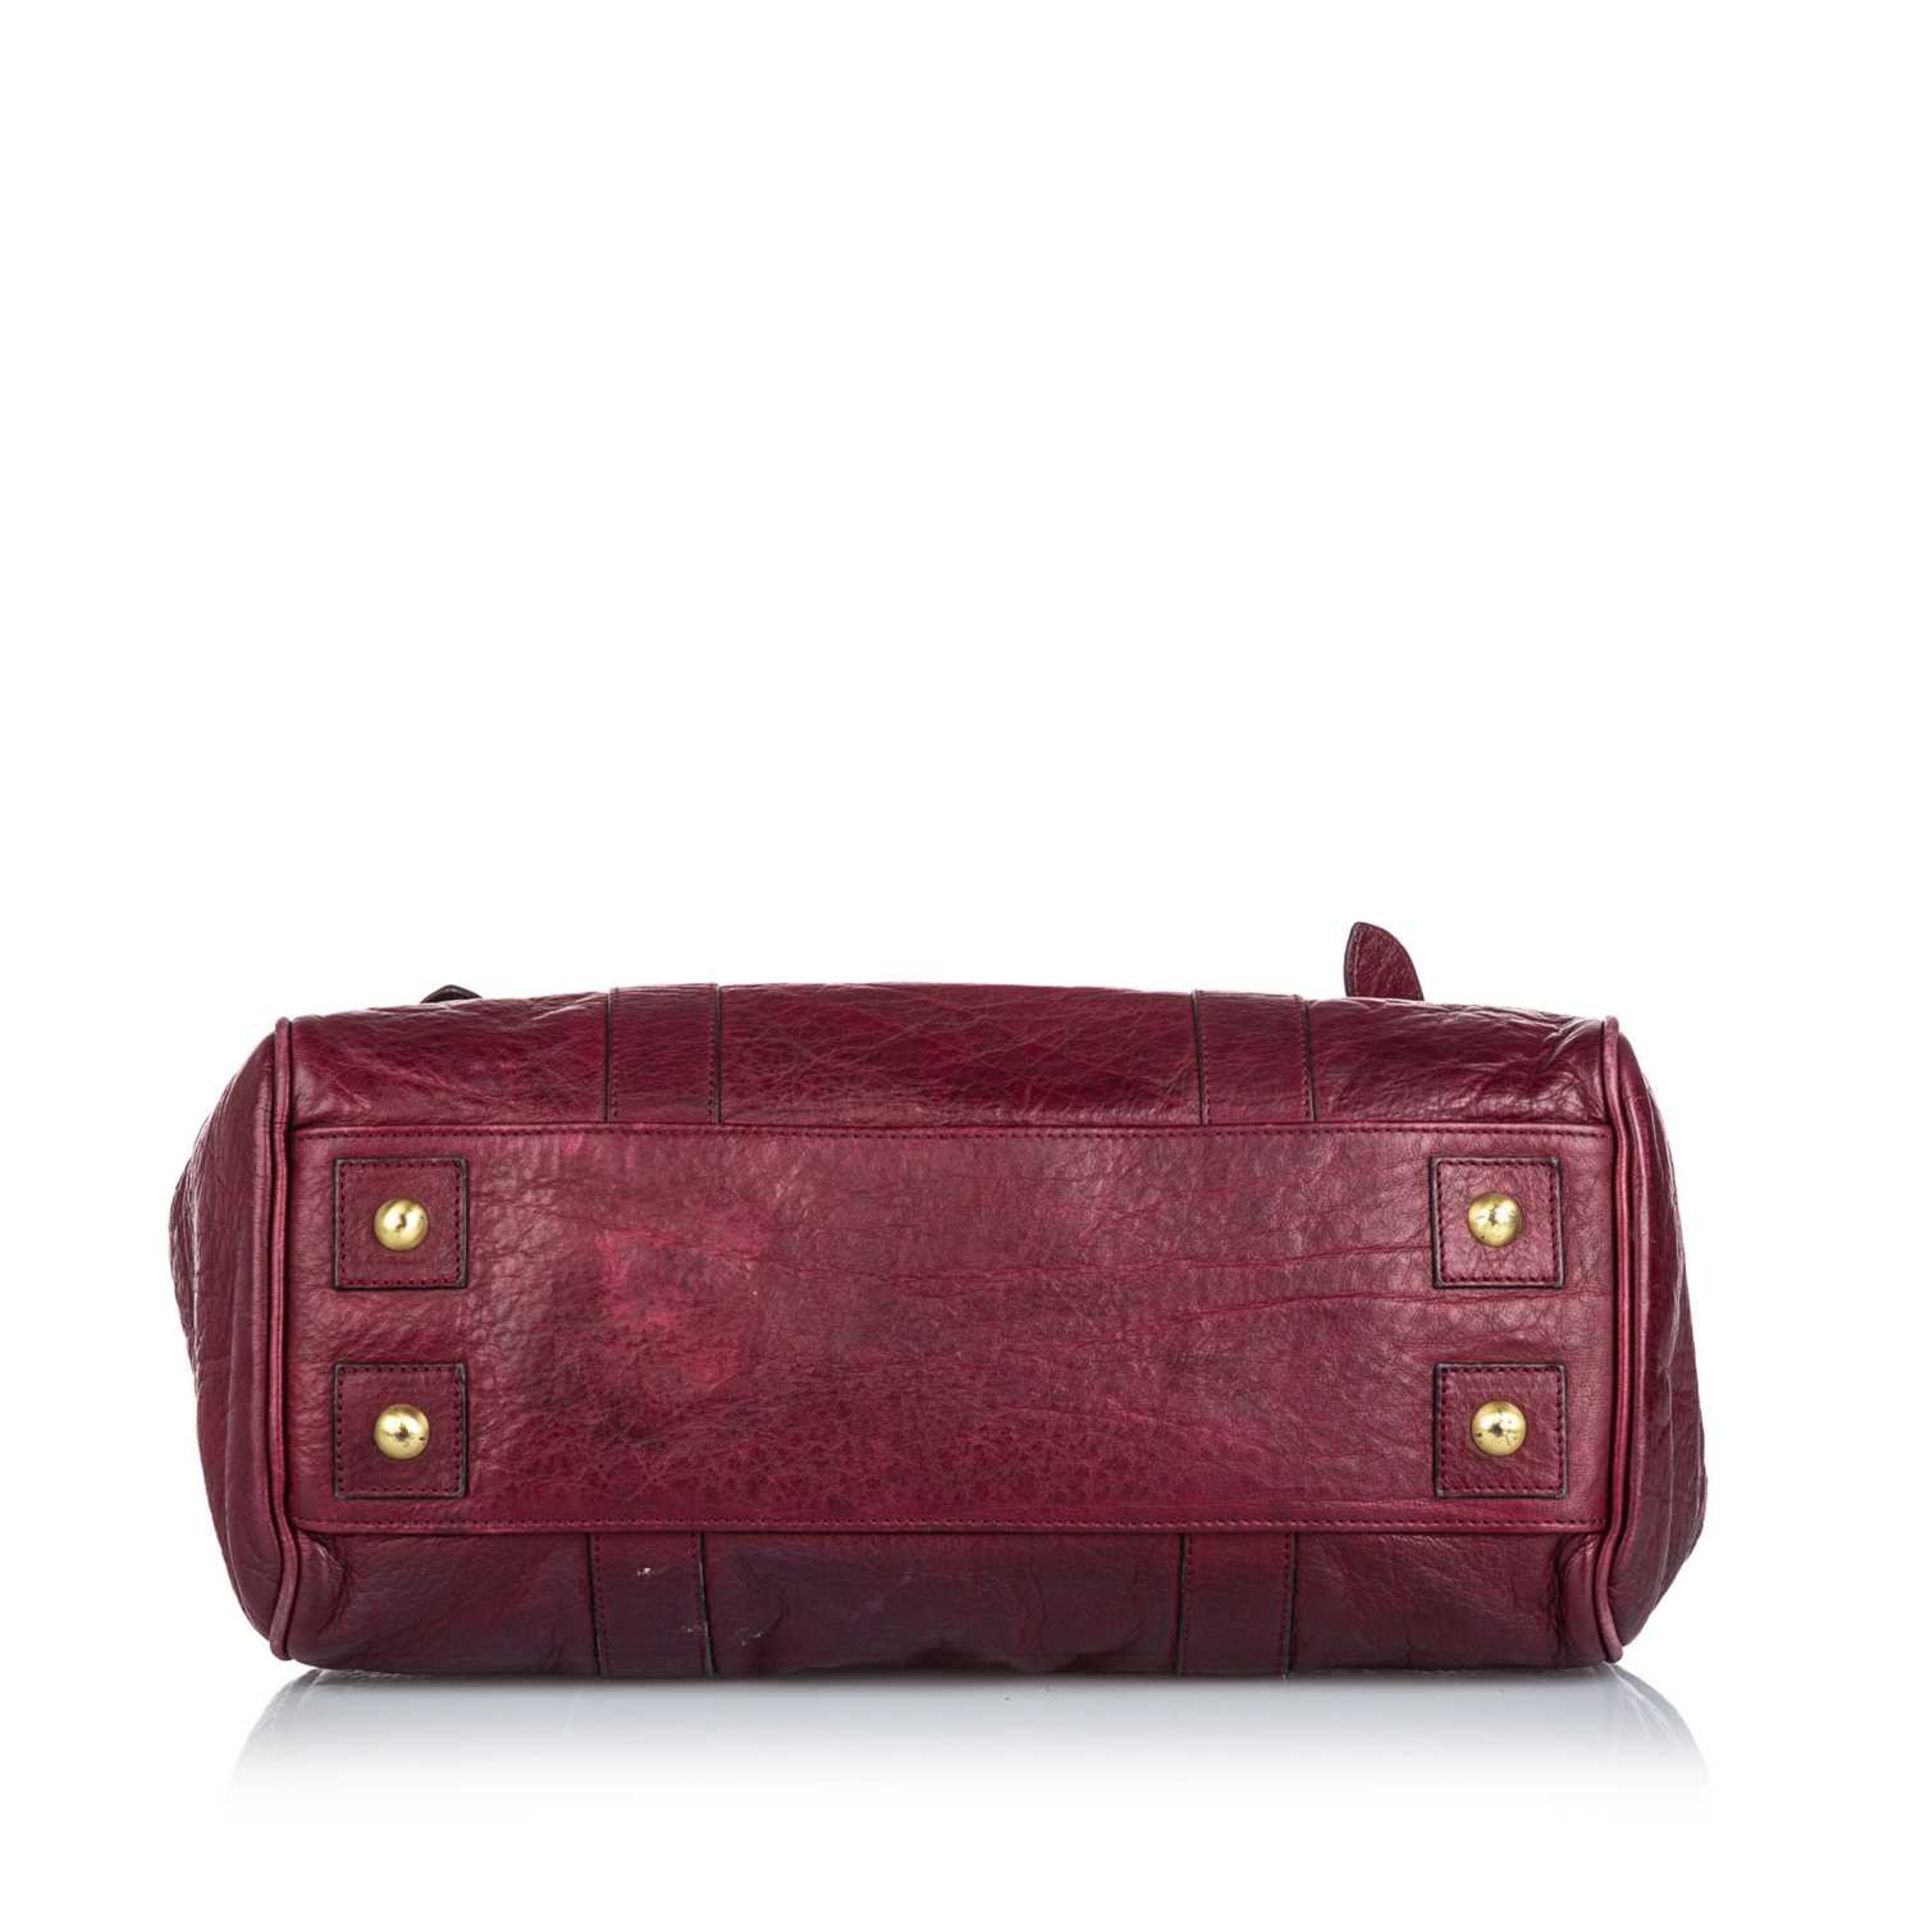 A Mulberry red leather 'Bayswater' satchel, - Image 17 of 20